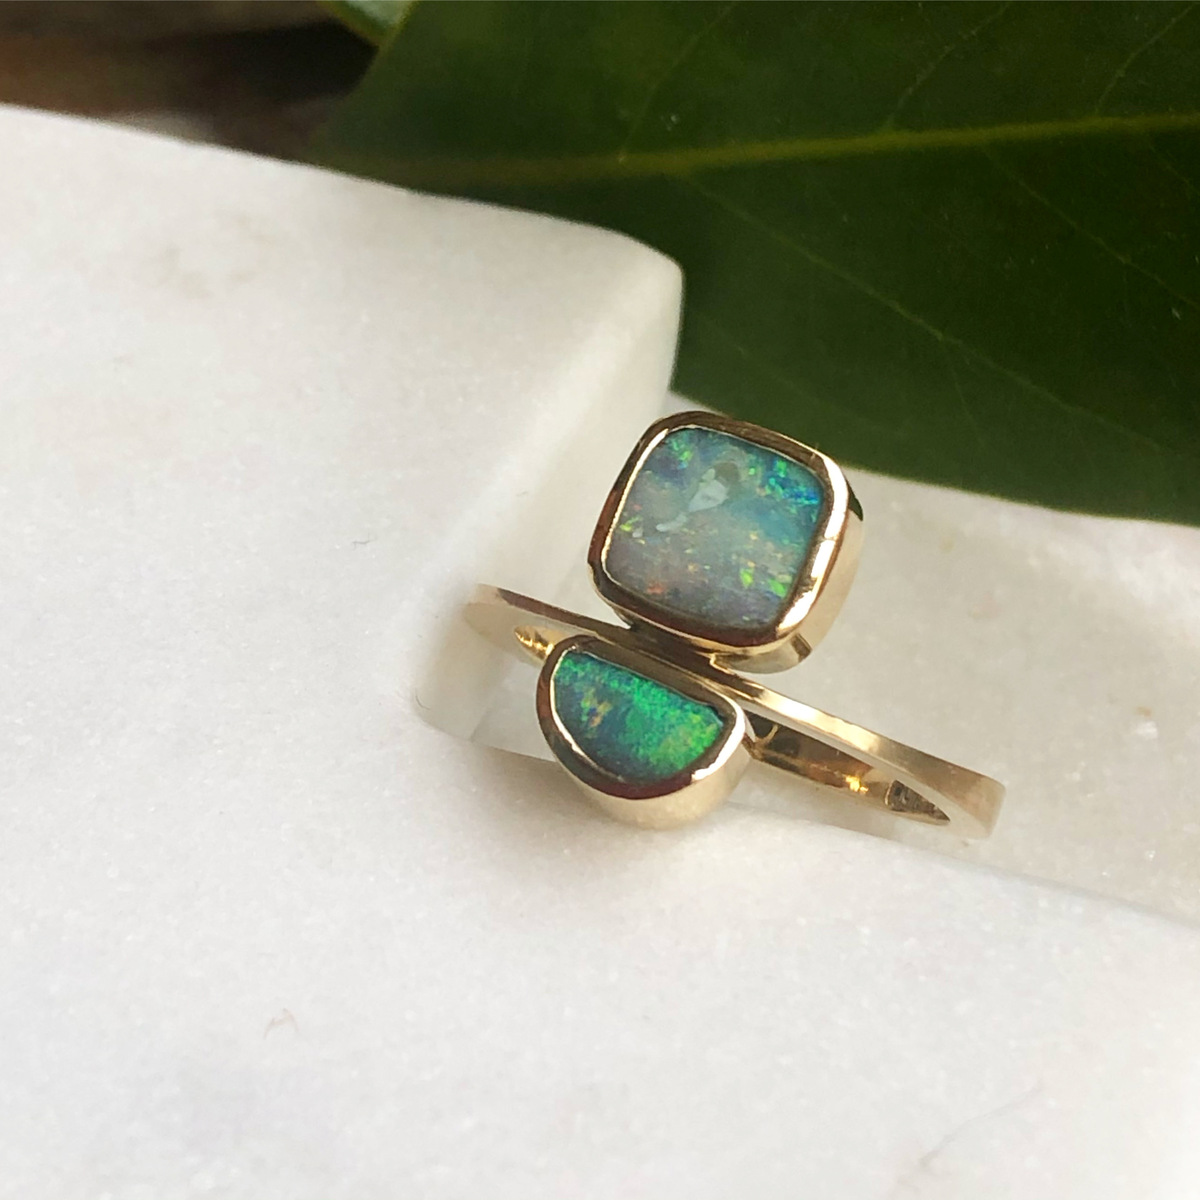 Solid boulder opal paver ring set with two green opals, 